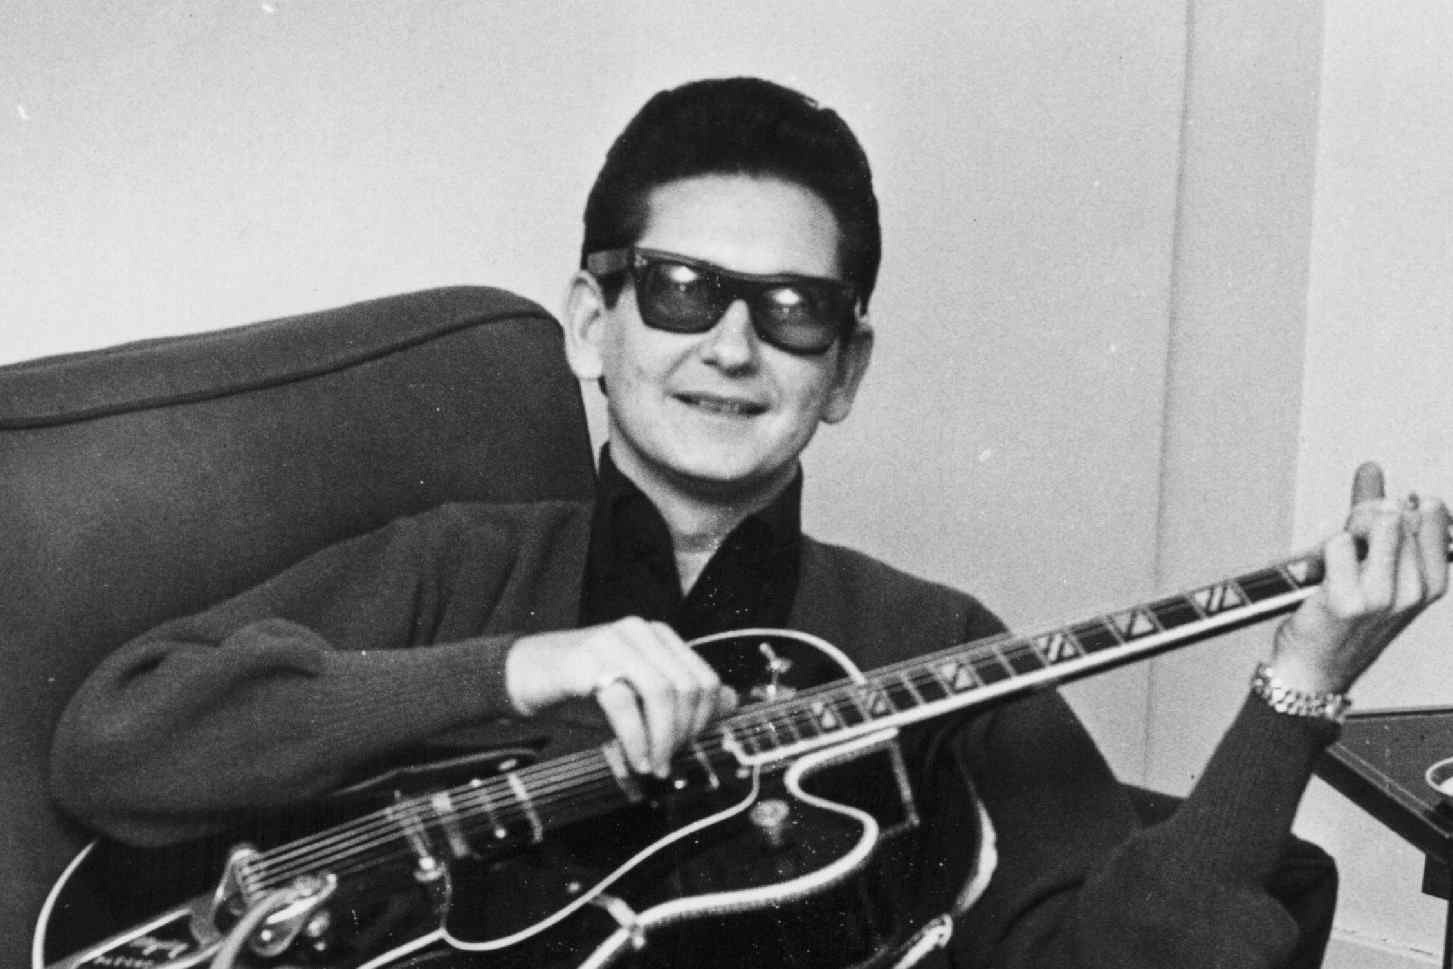 Image of American Musician, Roy Orbison